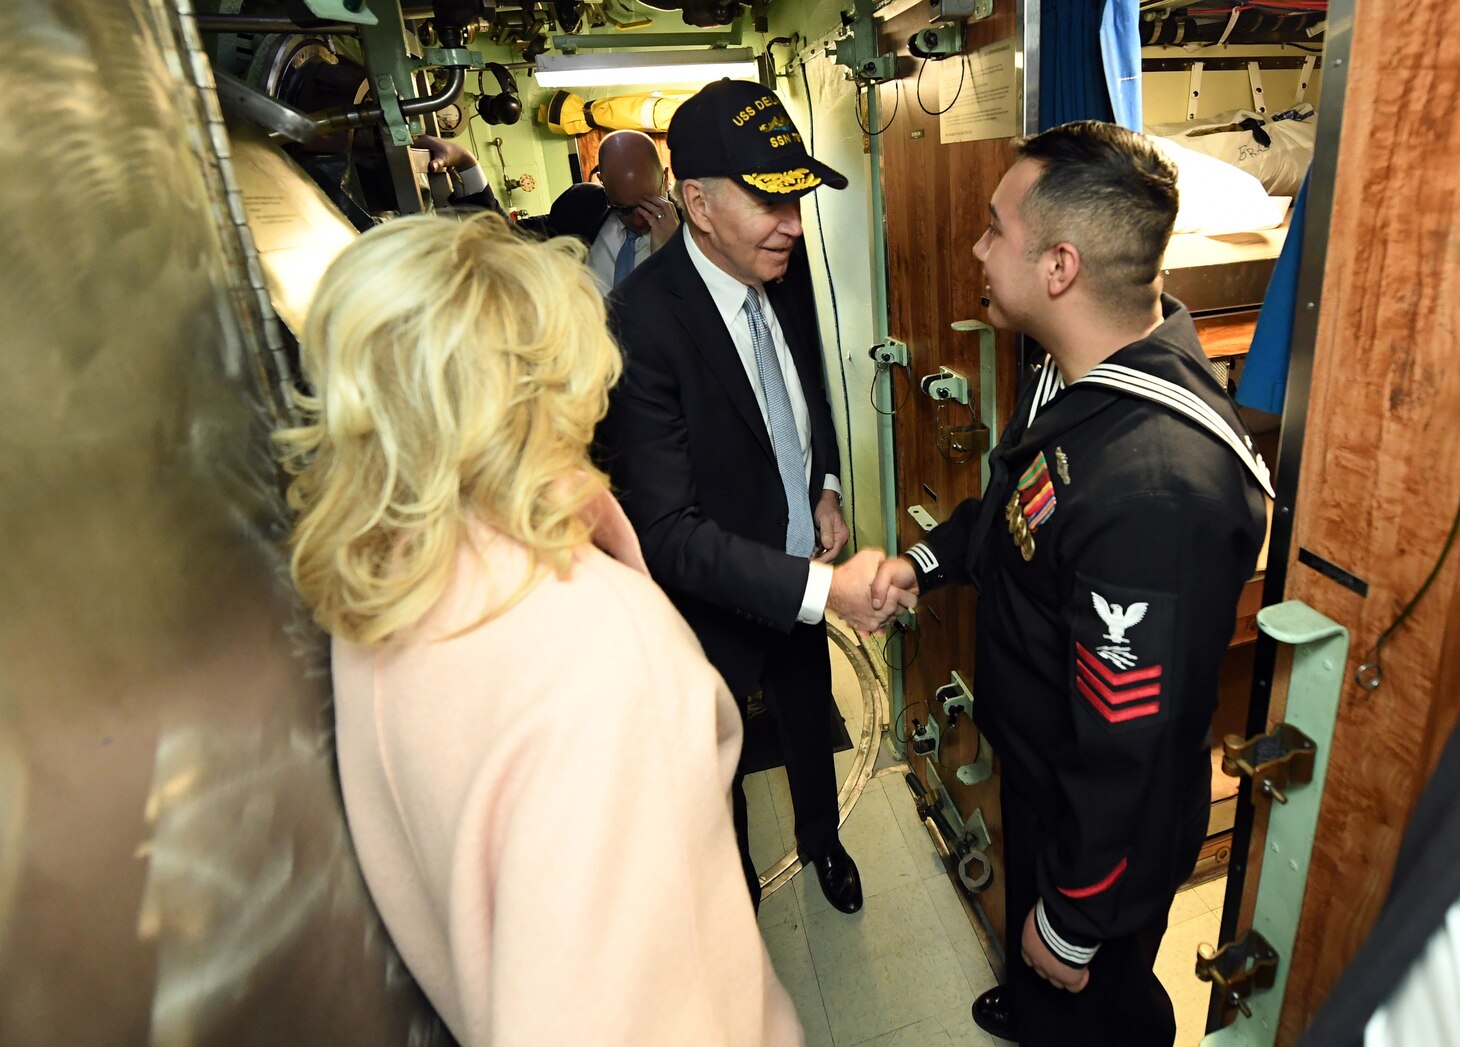 President of the United States Joe Biden and First Lady Jill Biden are greeted by Petty Officer 1st Class David Jaimeruiz following a commissioning commemoration ceremony for the Virginia-class submarine USS Delaware (SSN 791), and his family in Wilmington, Delaware April 2, 2022.